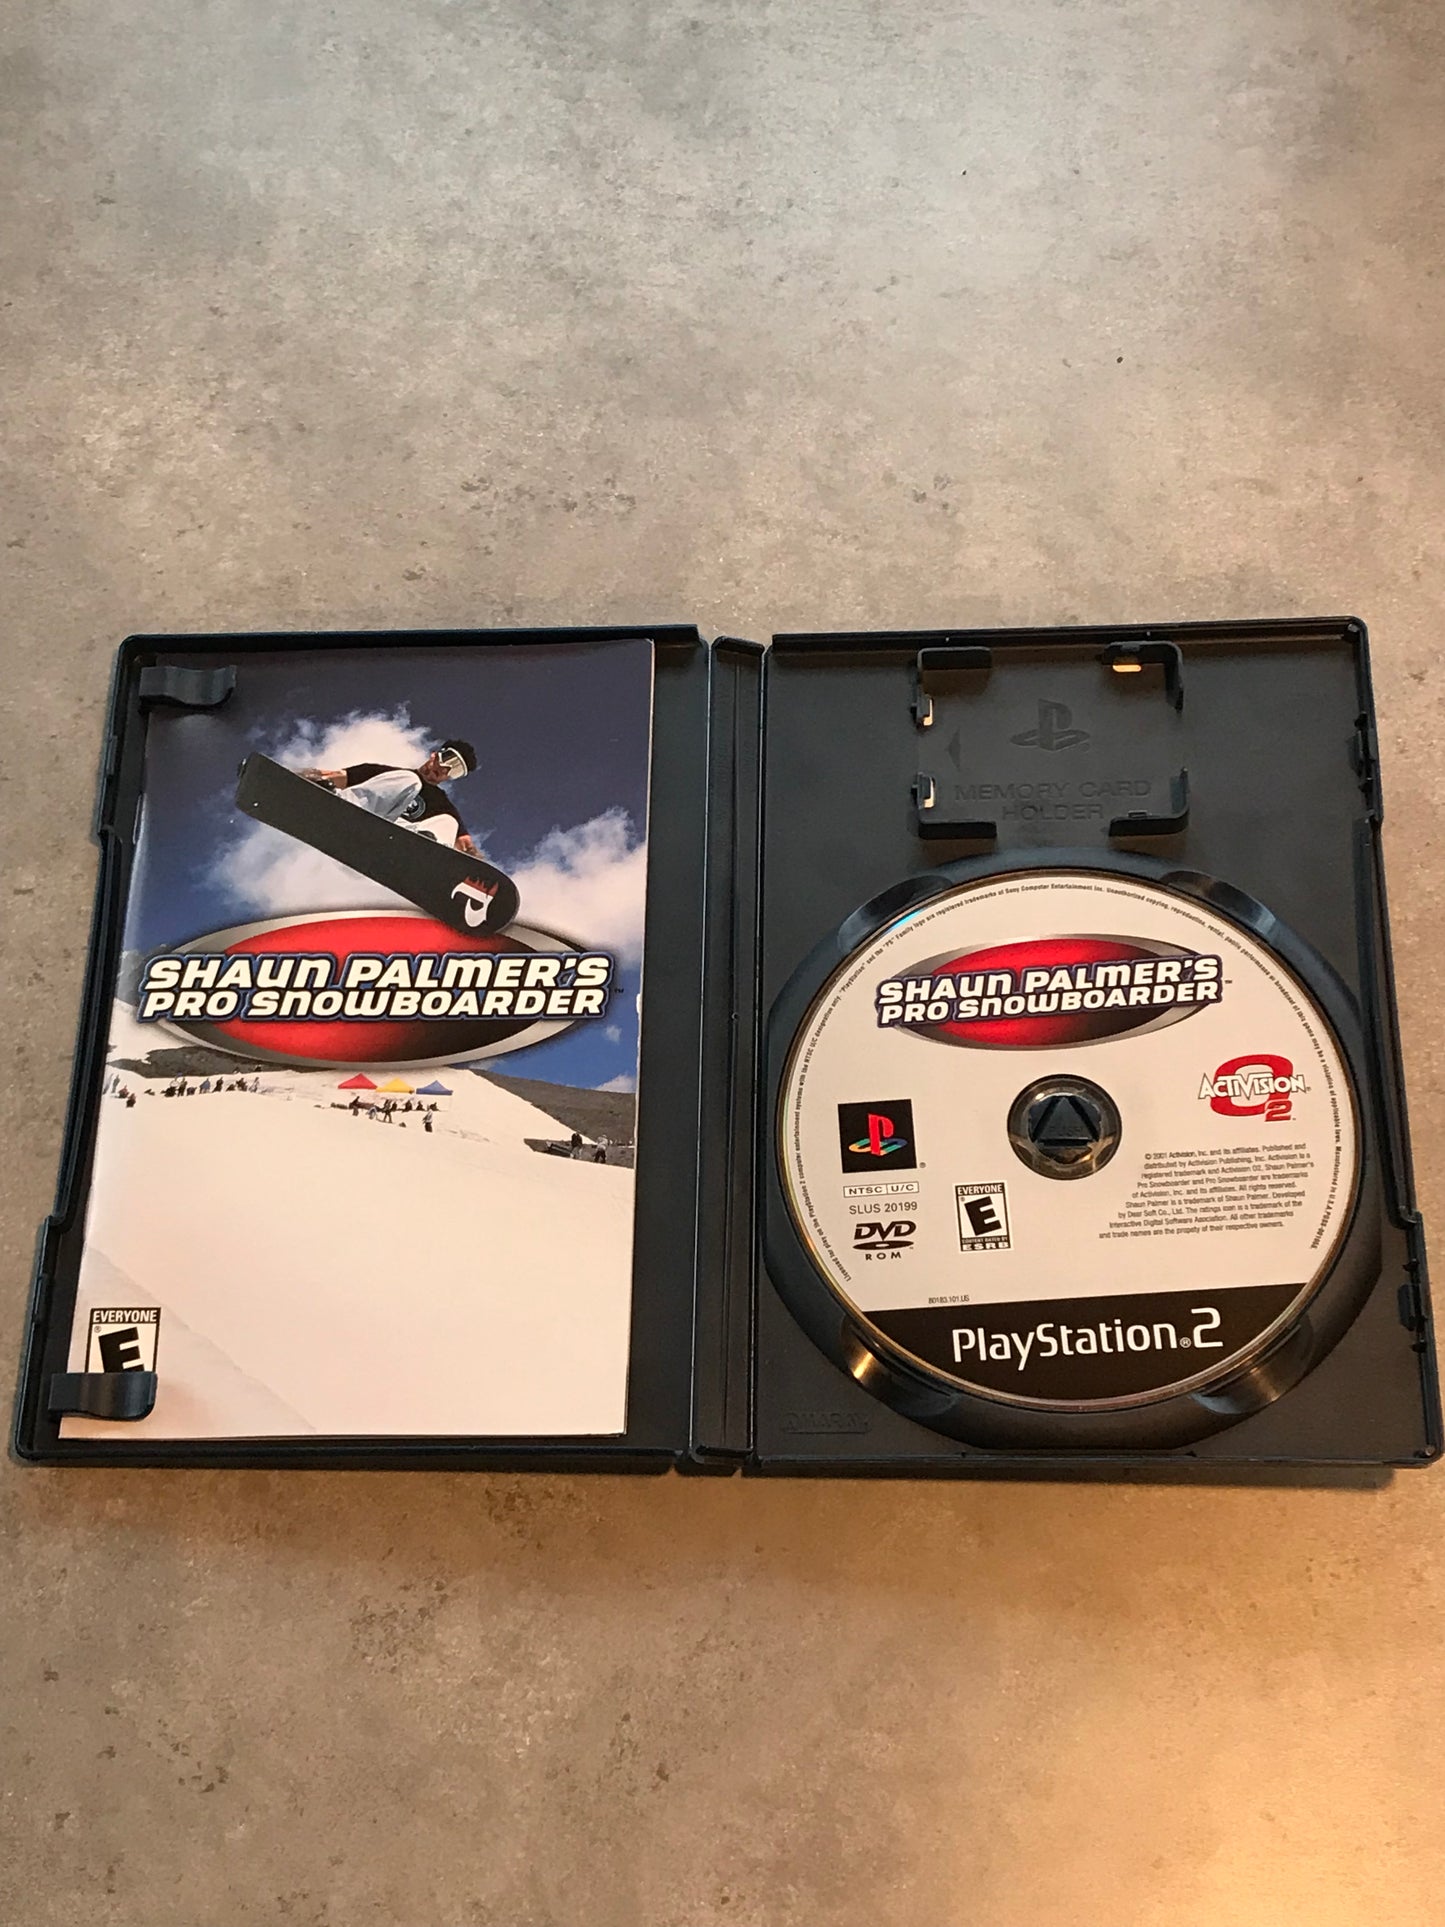 Shaun Palmer’s Pro Snowboarder - PS2 Game